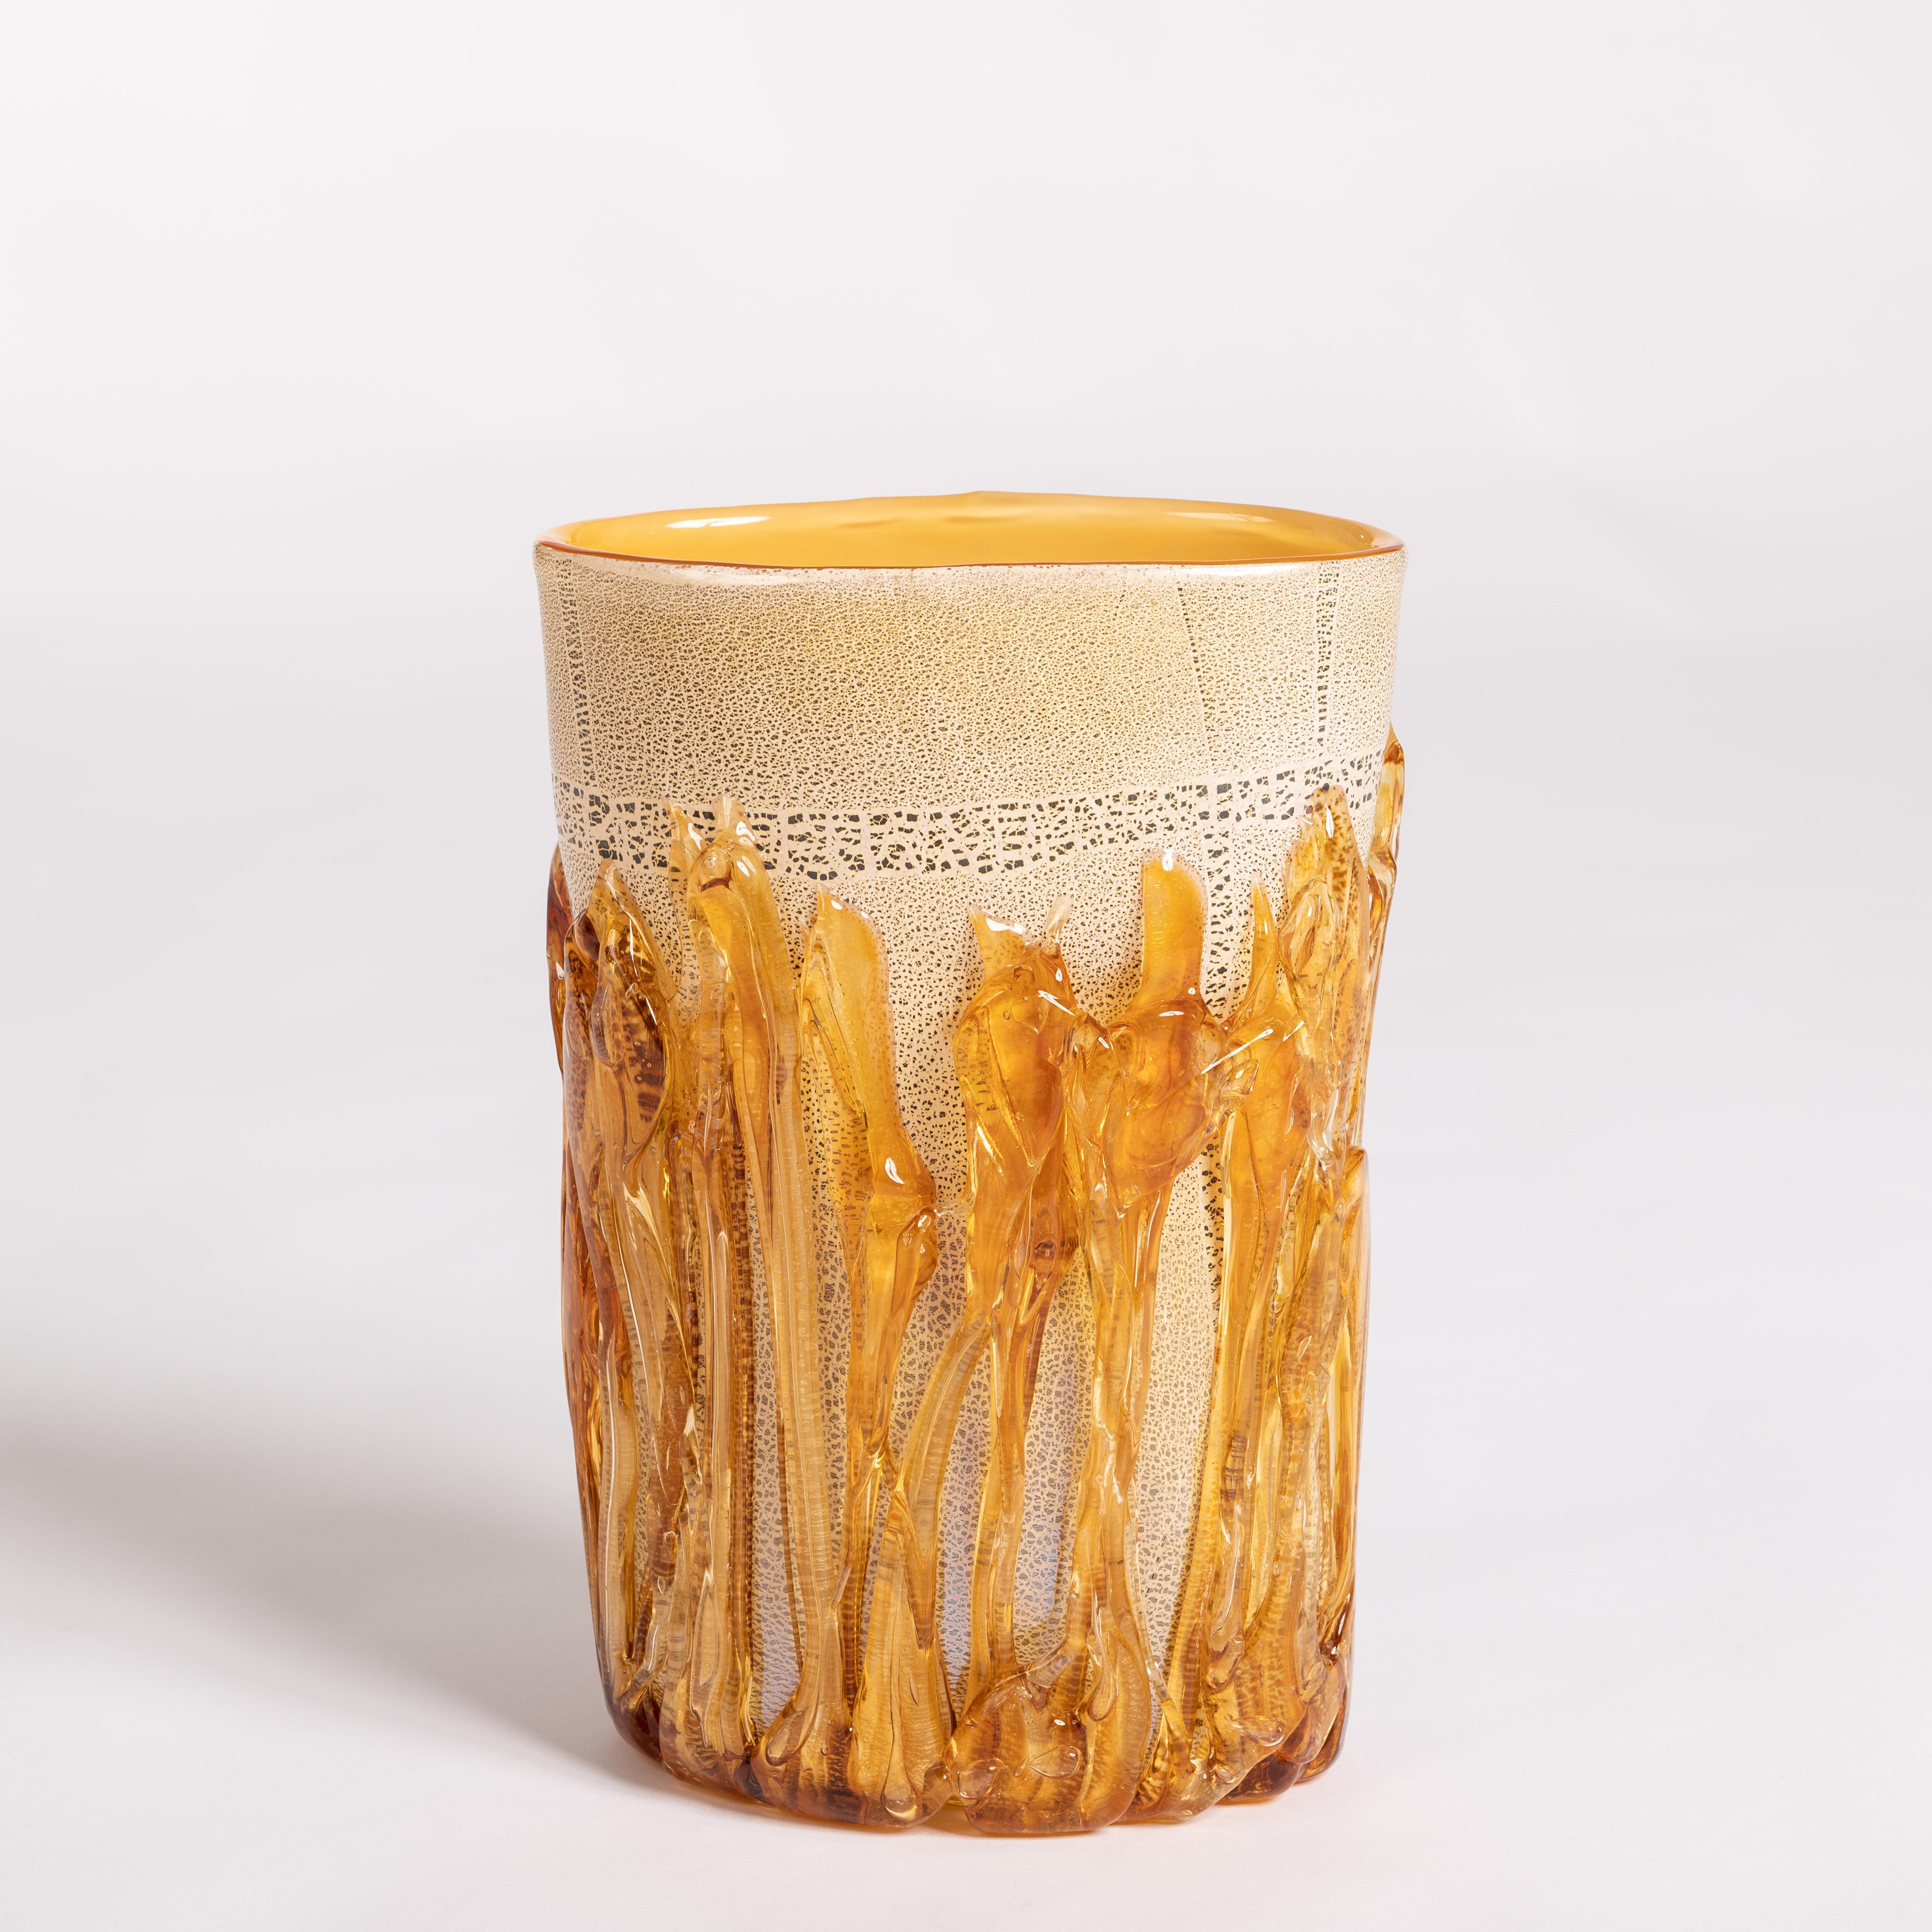 Modern Murano Glass Vase in Gold-Amber Color signed by Hand, Italy 2015 For Sale 2